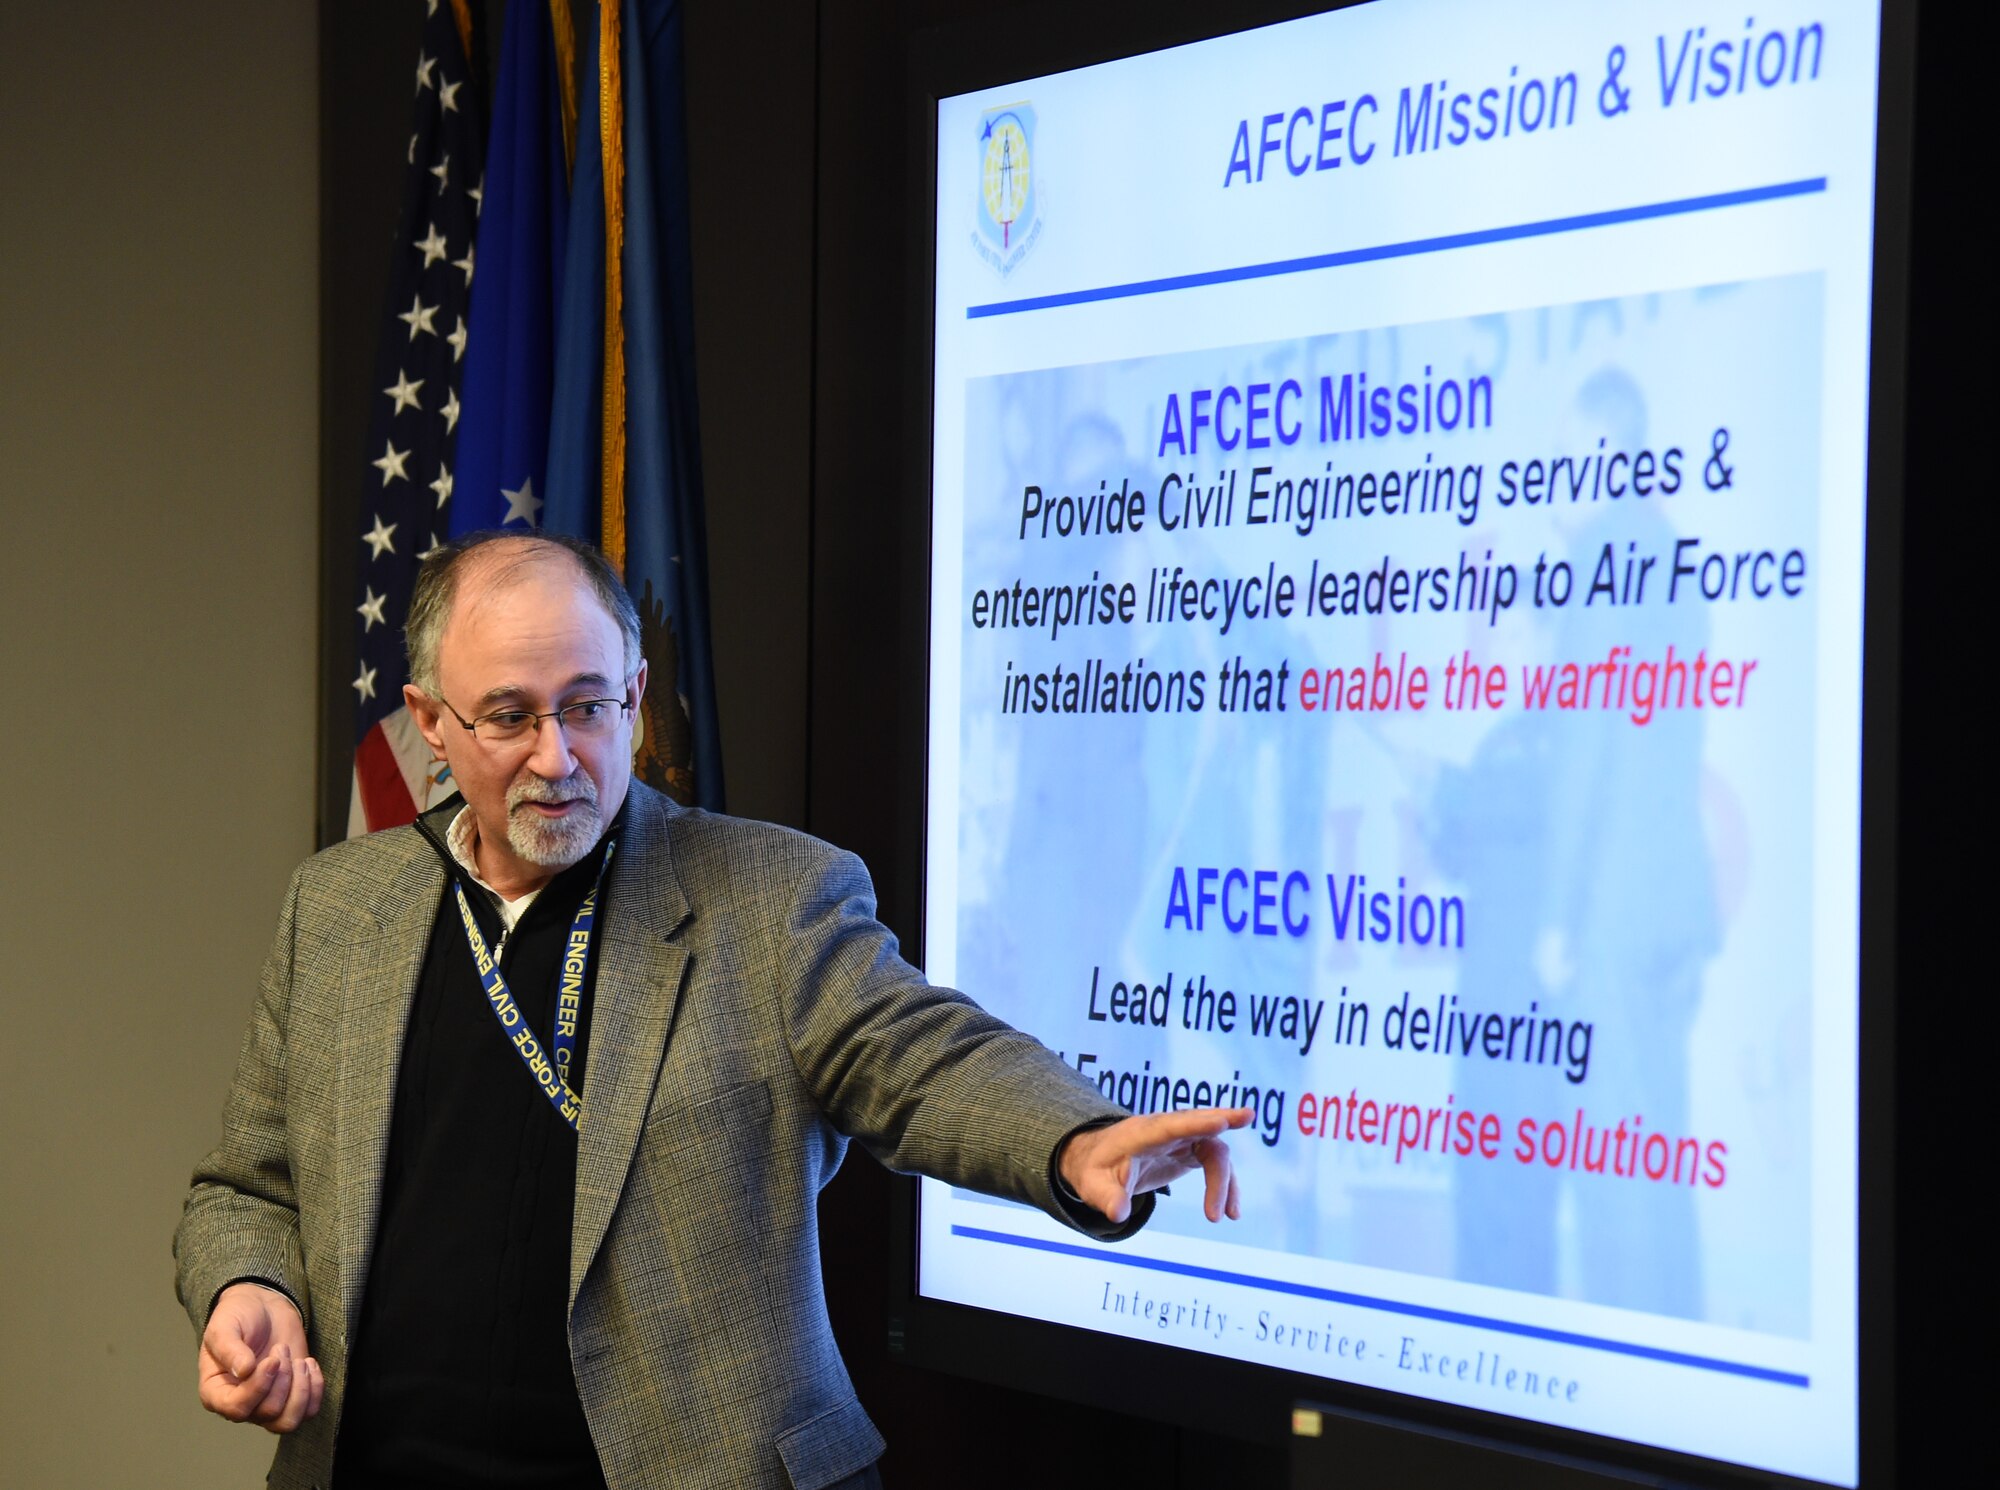 Joe Sciabica, director of the Air Force Civil Engineer Center, provides a mission briefing about his unit to attendees of the AFIMSC leadership meeting Feb. 12 at Joint Base Andrews, Maryland. (U.S. Air Force photo by Airman 1st Class Philip Bryant)